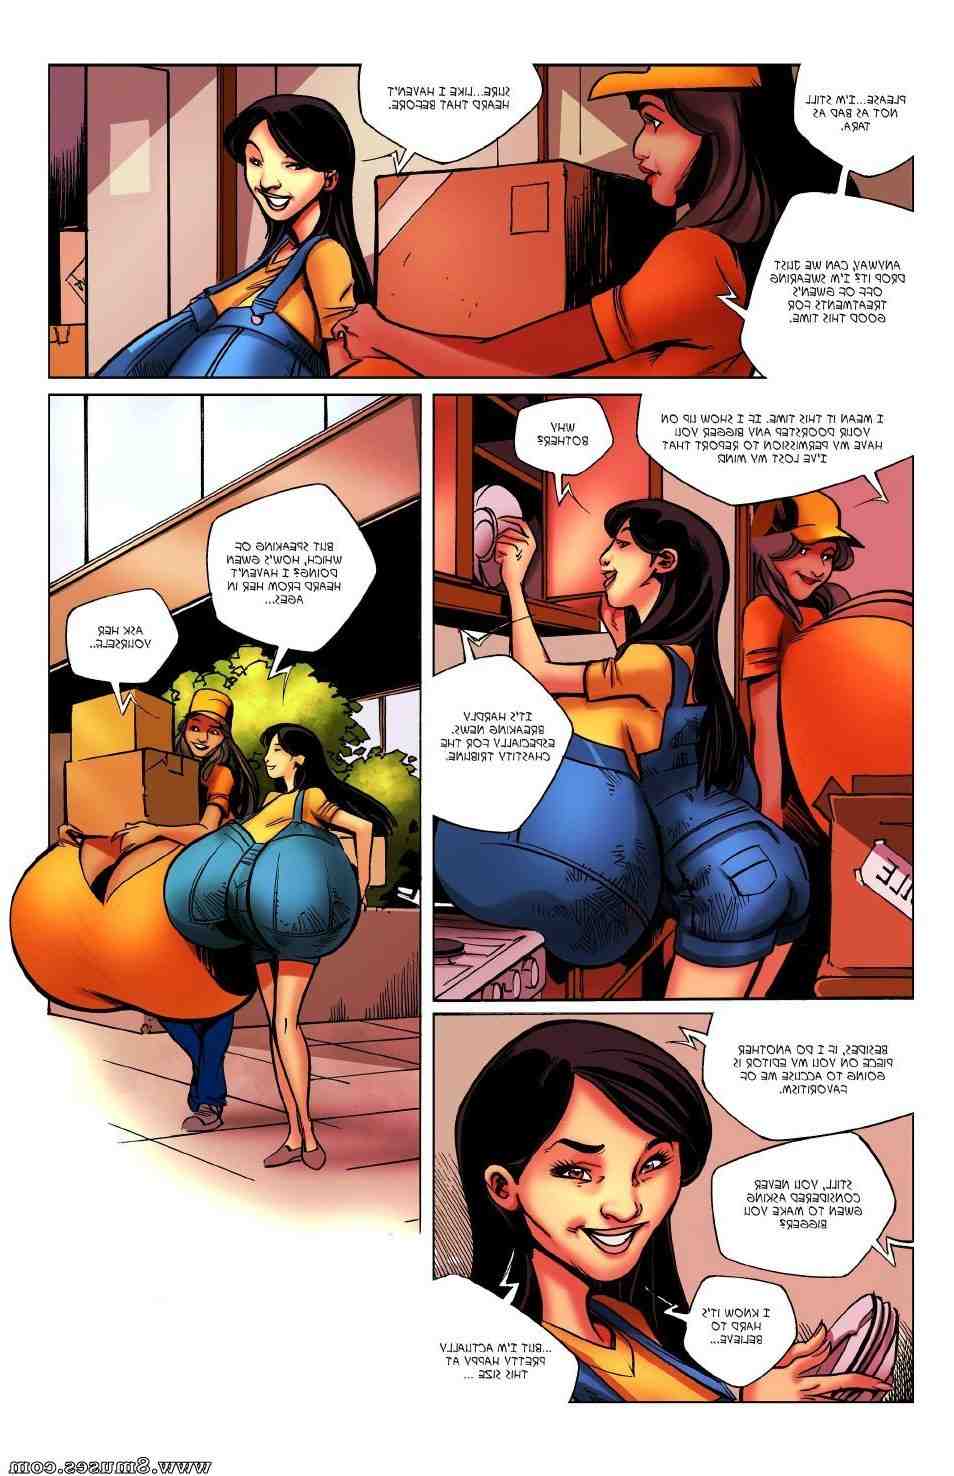 BE-Story-Club-Comics/Farewell-from-Chastity Farewell_from_Chastity__8muses_-_Sex_and_Porn_Comics_6.jpg